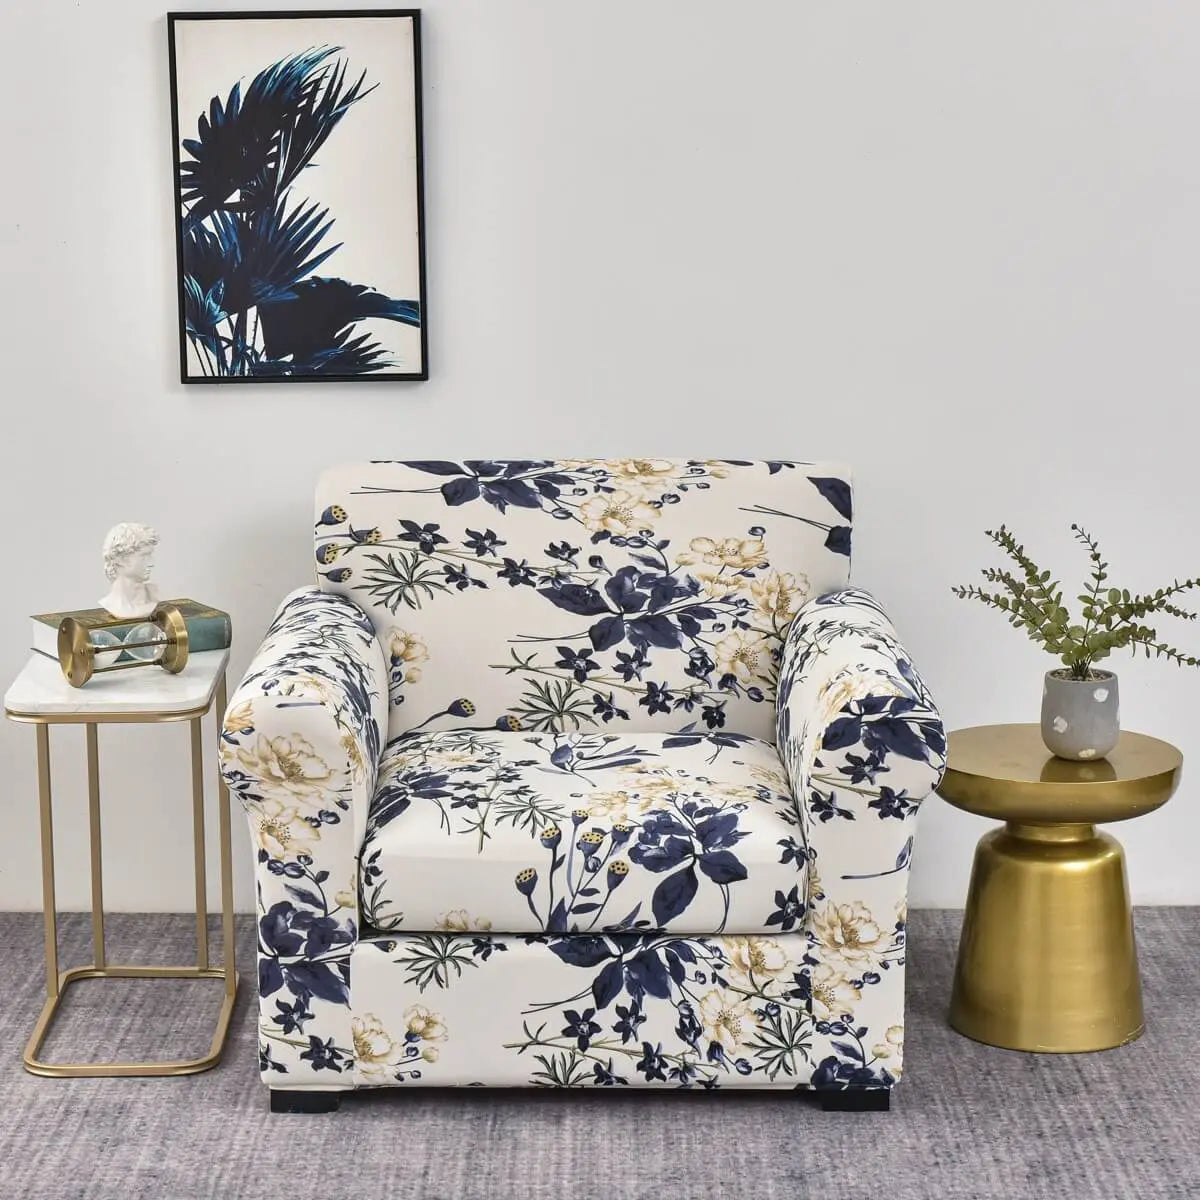 Crfatop Stretch Armchair Cover Slipcovers for 1 Seater Chair Slip Cover Blue-white